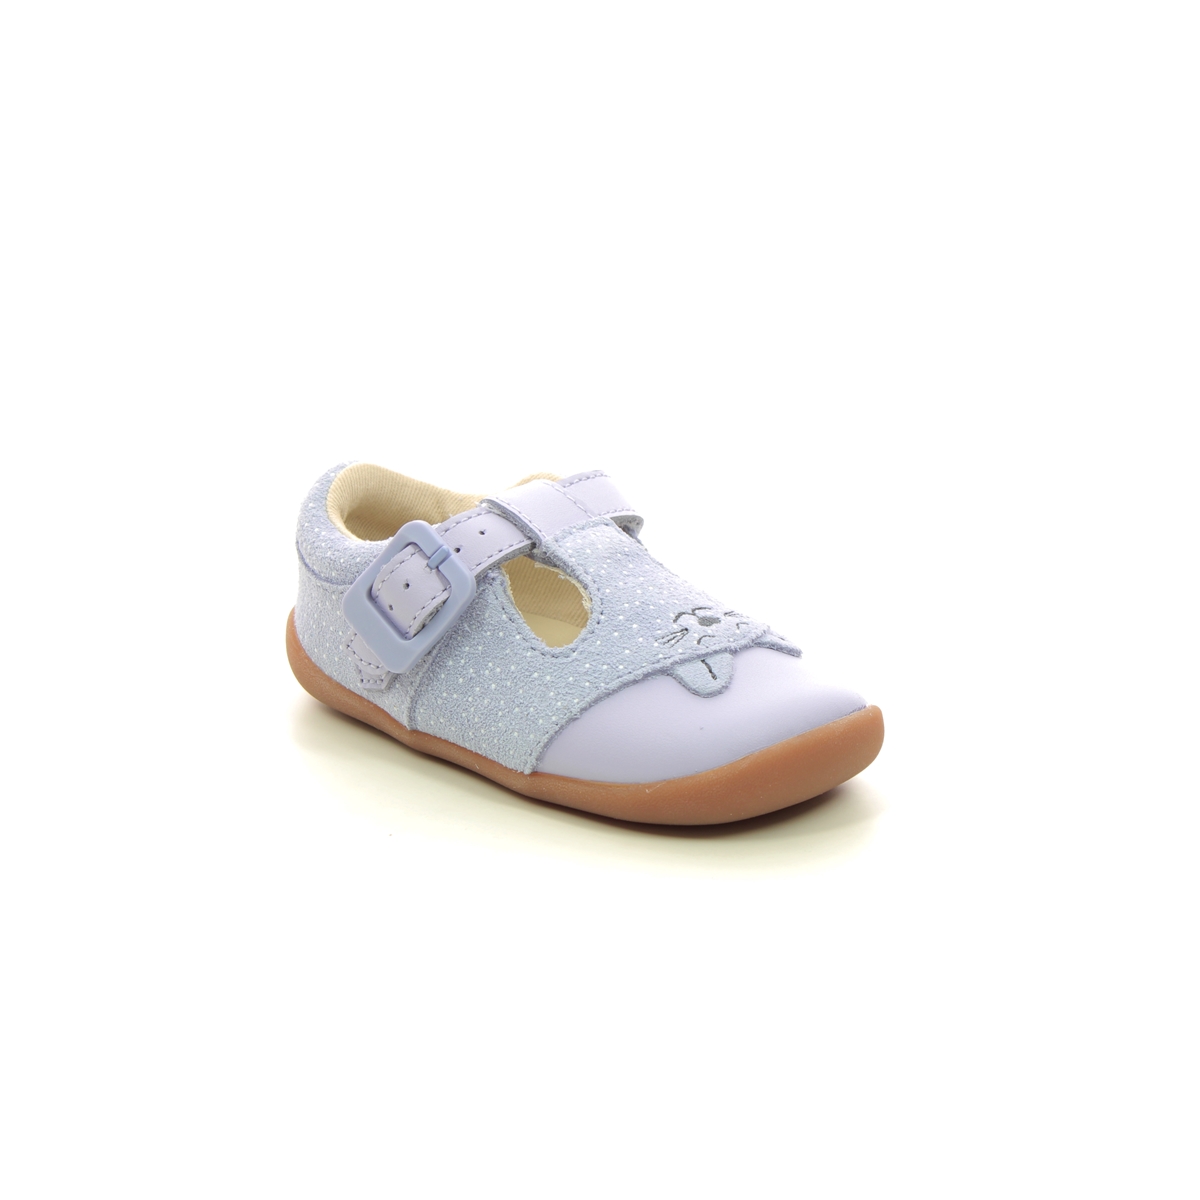 Clarks Roamer Cub T Lilac Kids girls first and baby shoes 7230-96F in a Plain Leather in Size 3